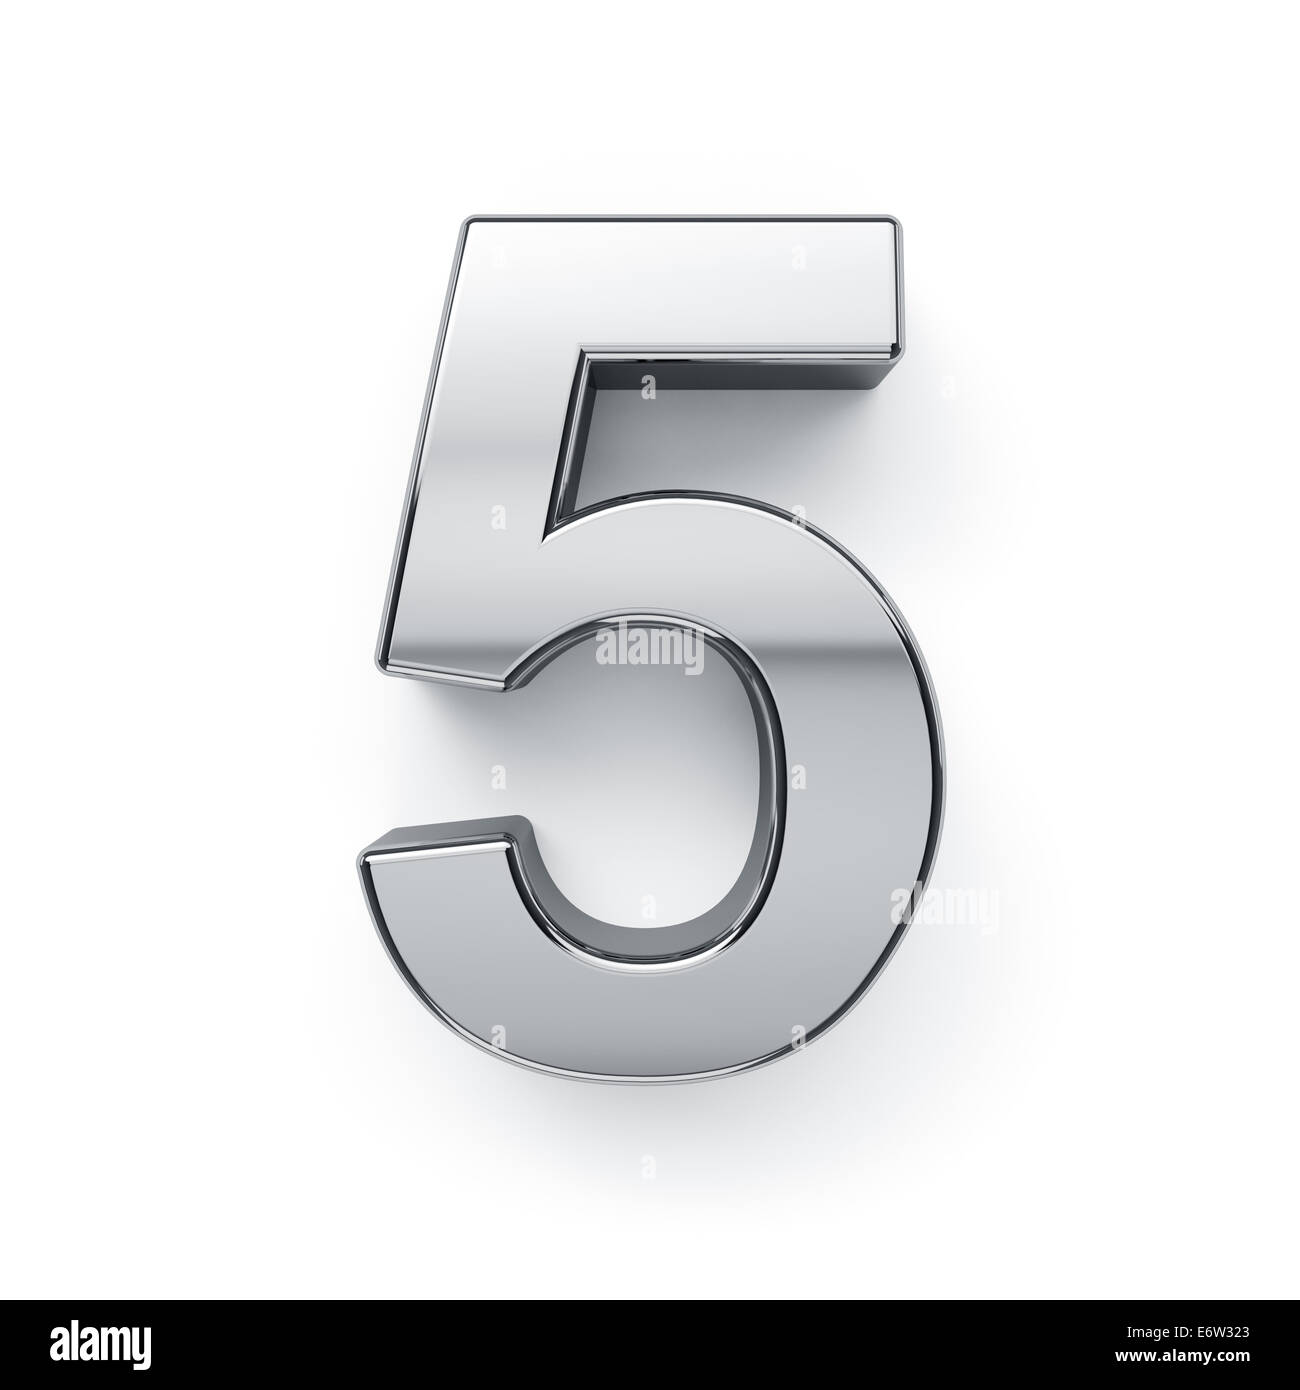 3d render of metallic digit five symbol - 5. Isolated on white background Stock Photo